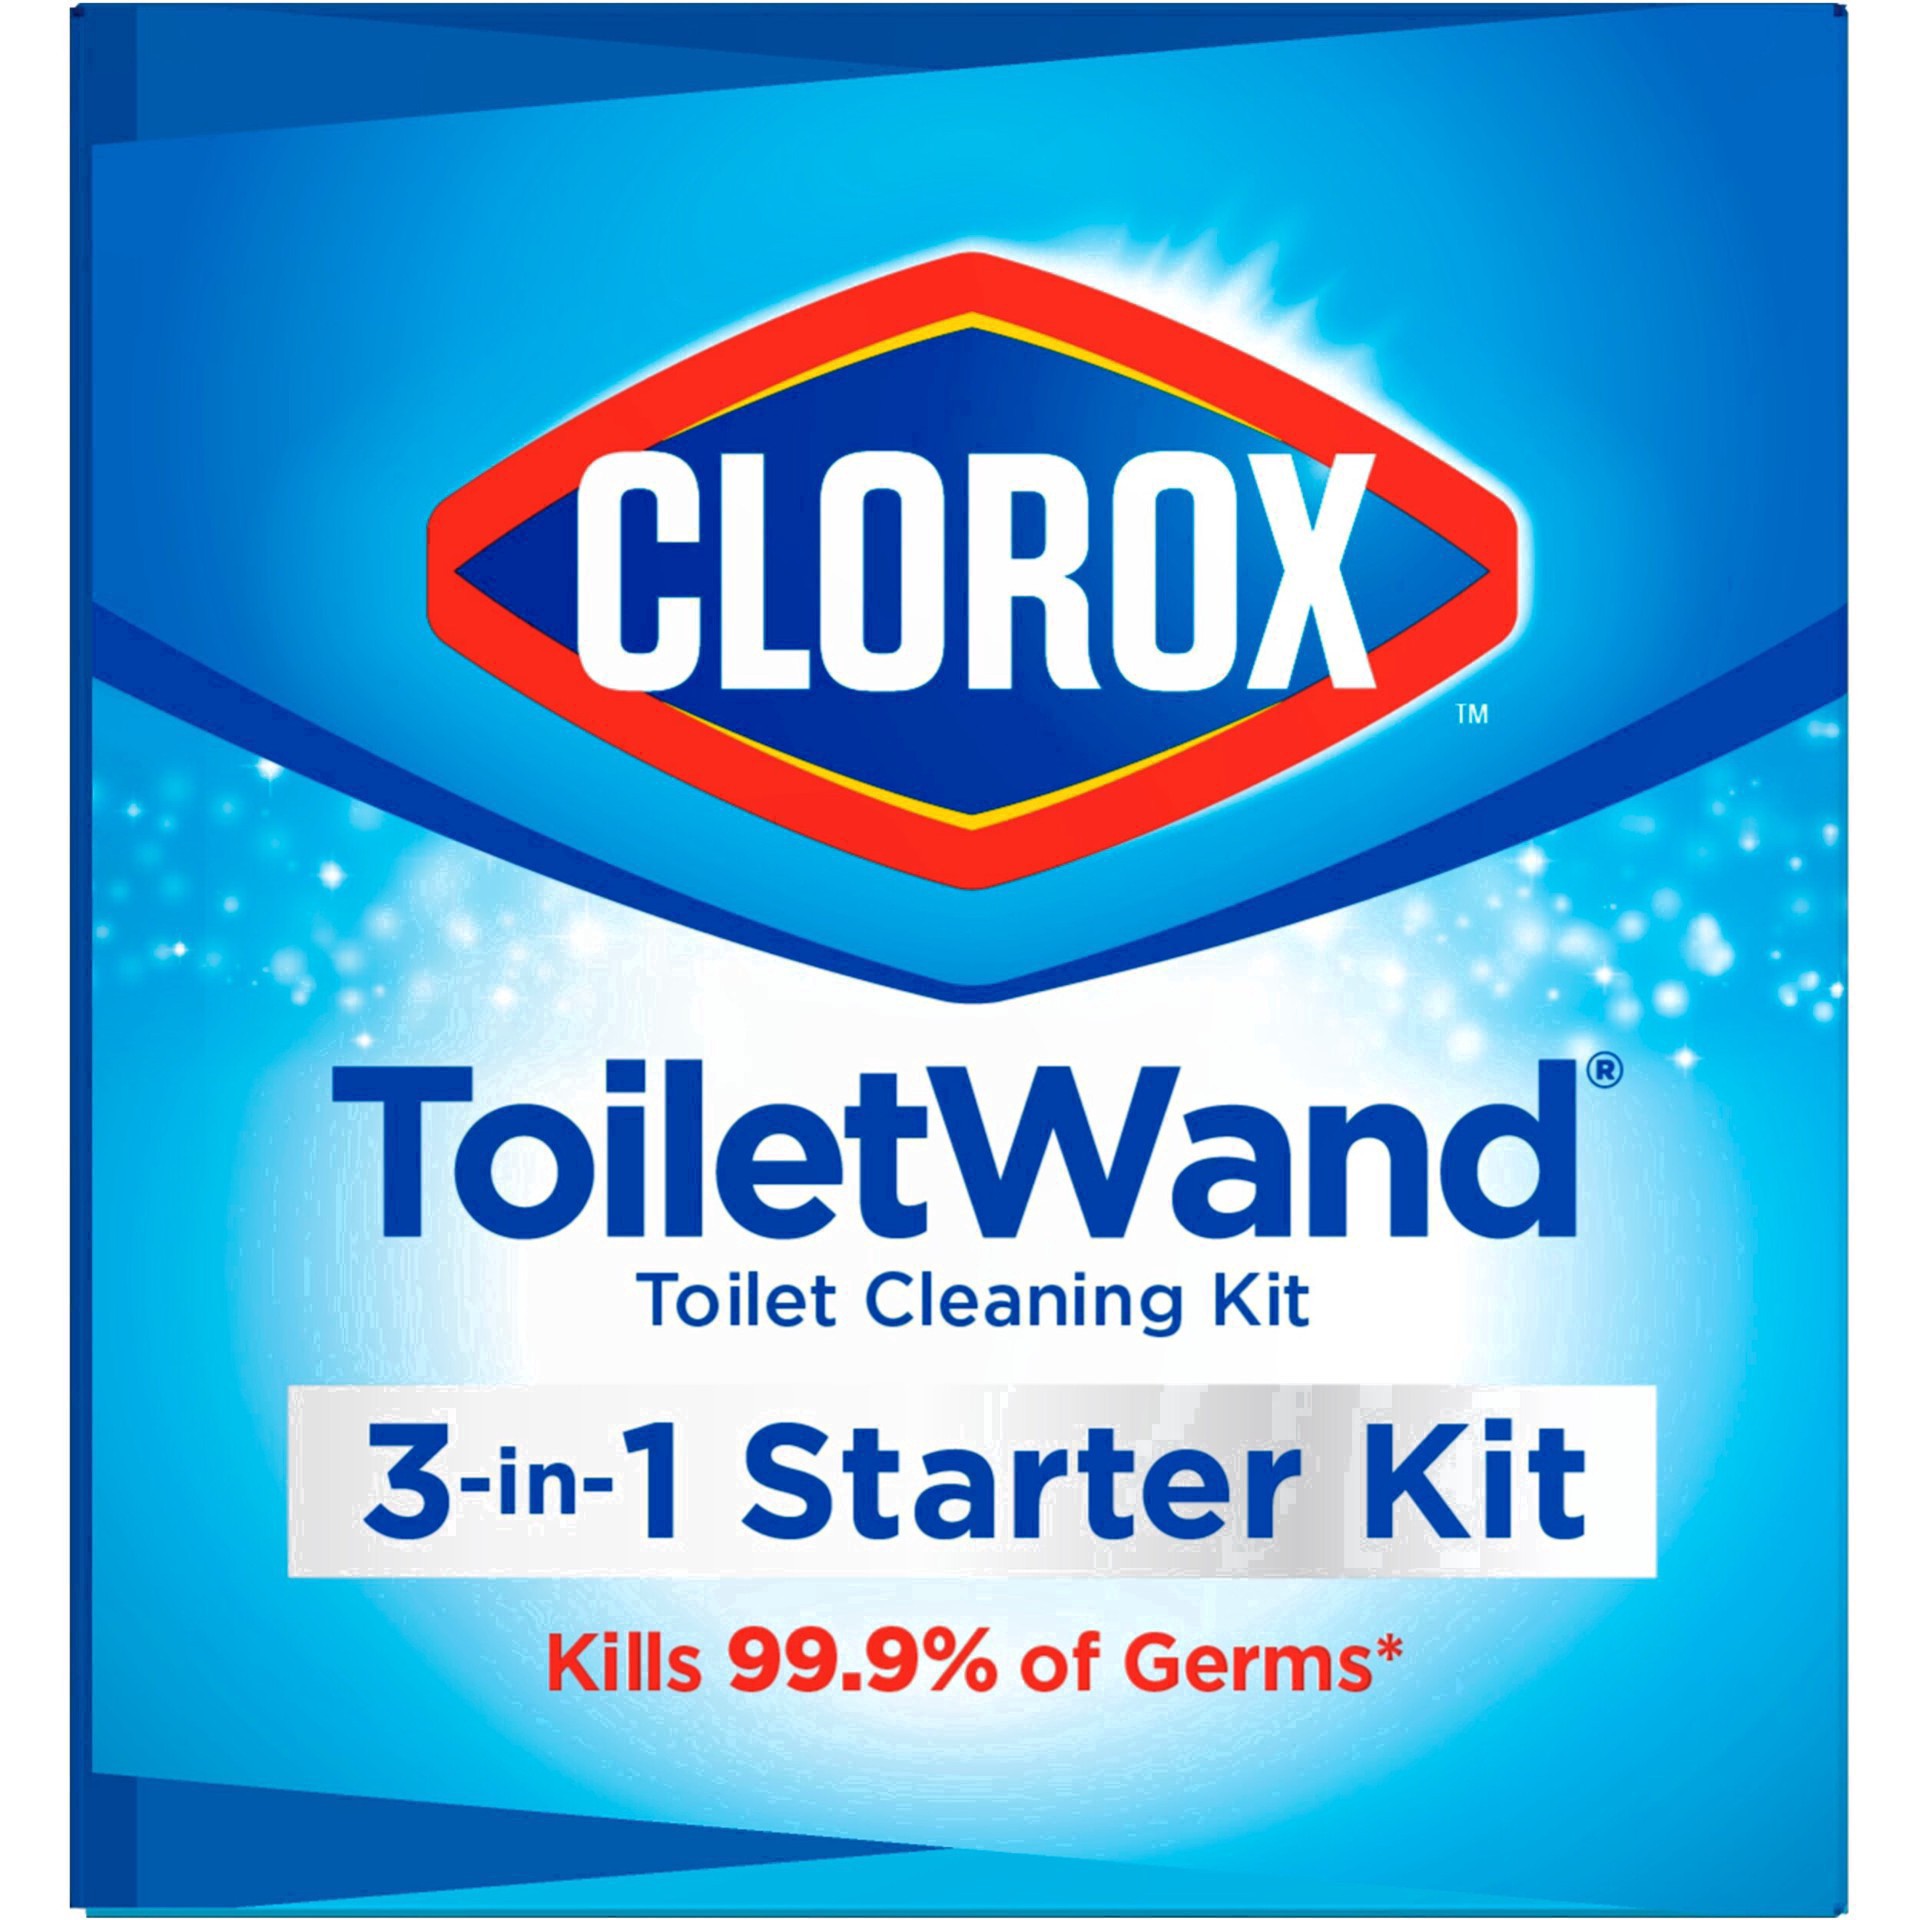 slide 15 of 176, Clorox Toilet Wand 3-in-1 Starter Toliet Cleaning Kit, 1 ct